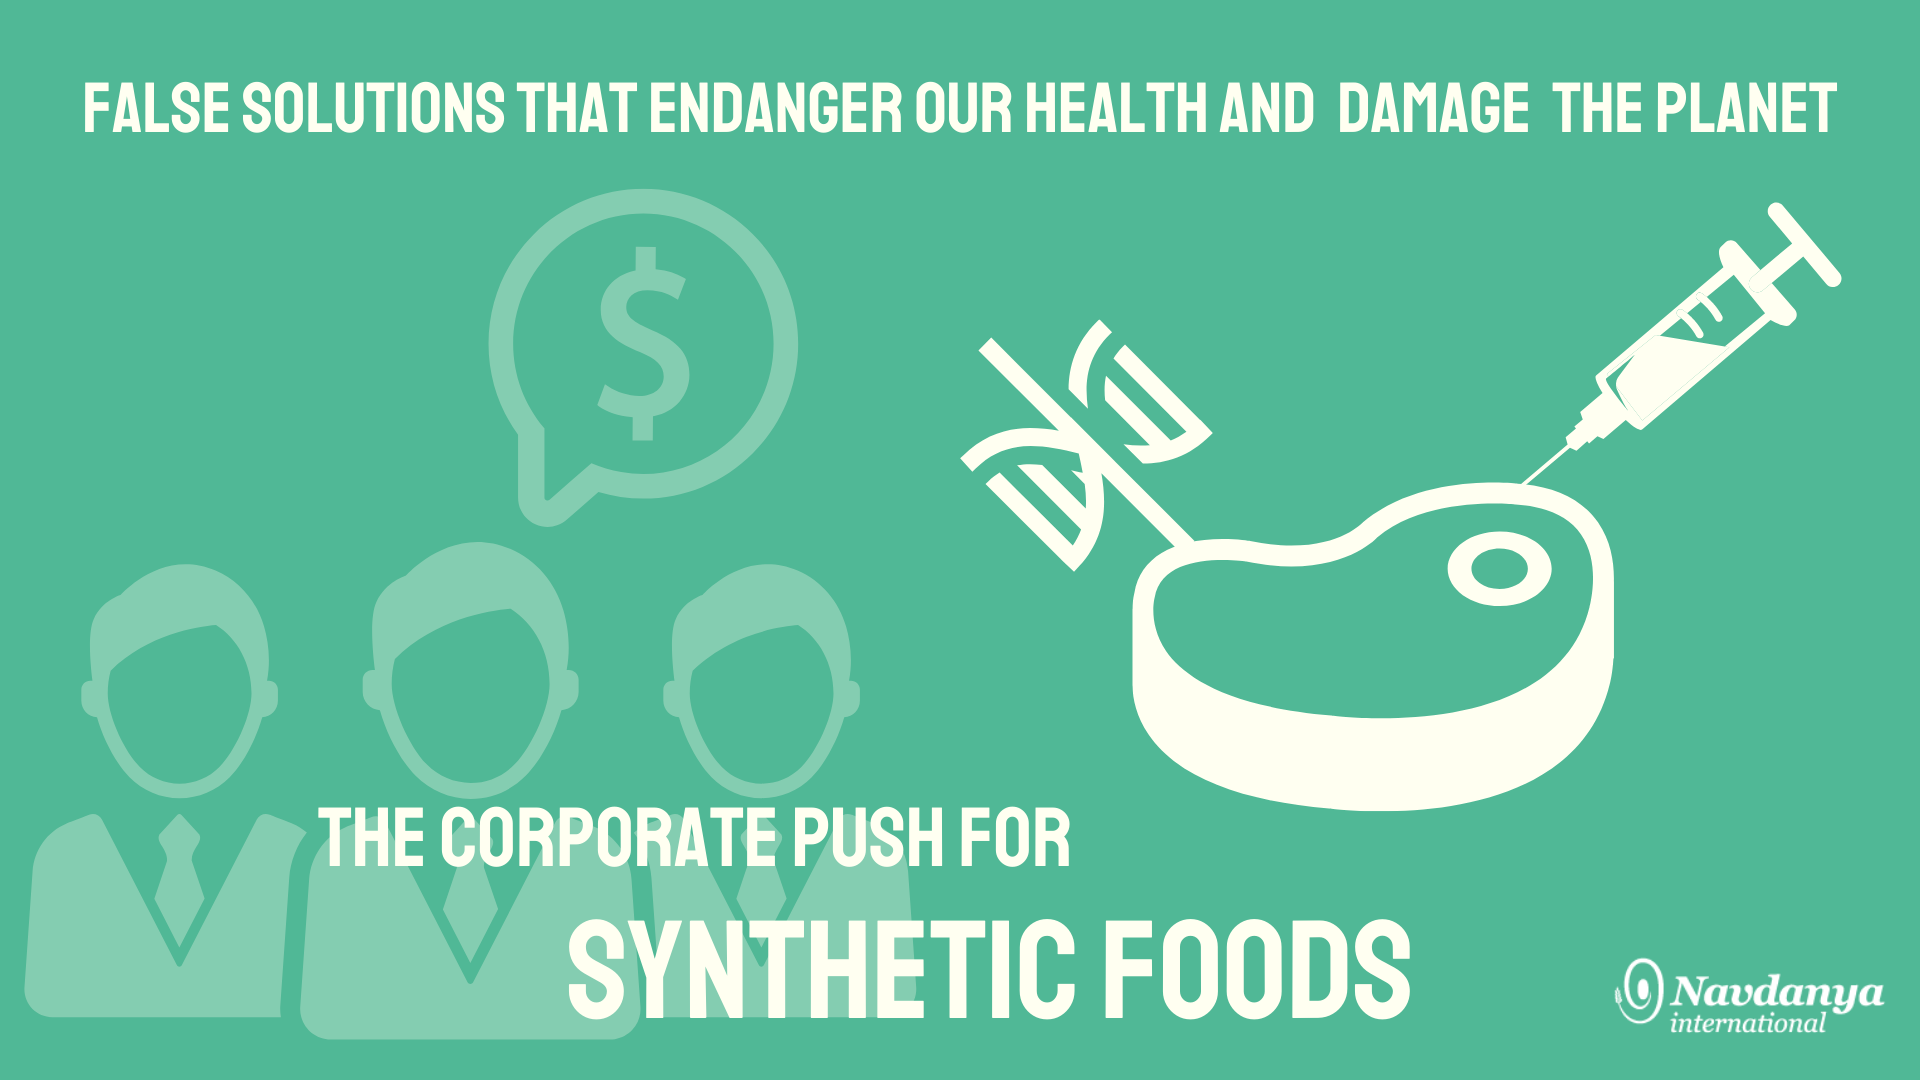 Our Health. Synthetic food. Biotech Market. Ecomunity. Our endangered planet